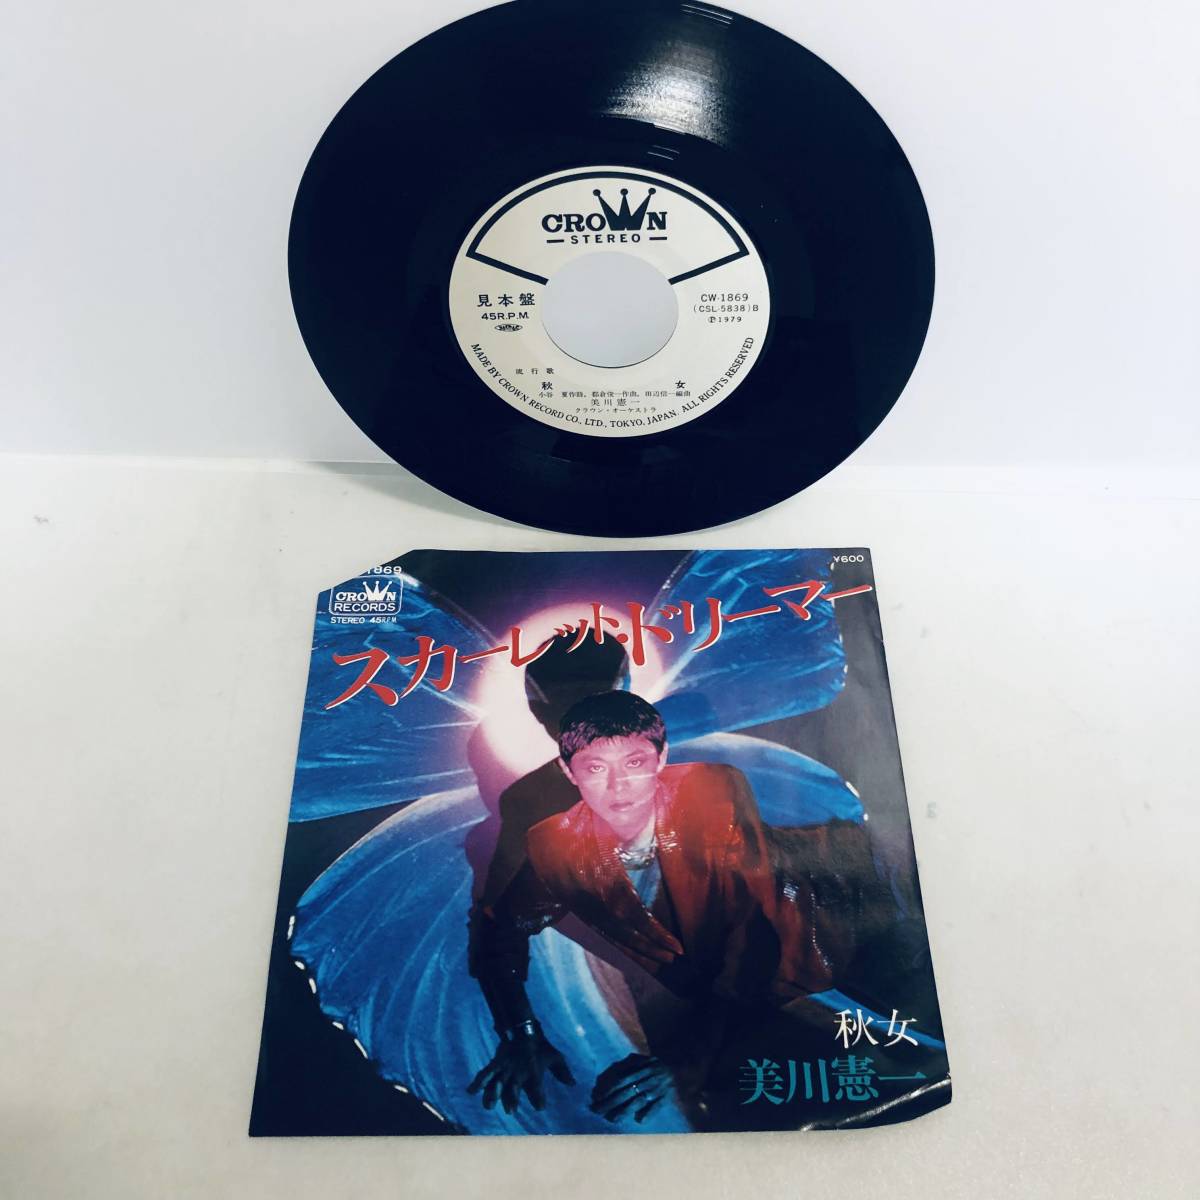 [EP] record reproduction not yet verification ultra rare! sample record scarlet do Lee ma- beautiful river . one disco song CITY POP DISCO * cat pohs nationwide equal postage 260 jpy 